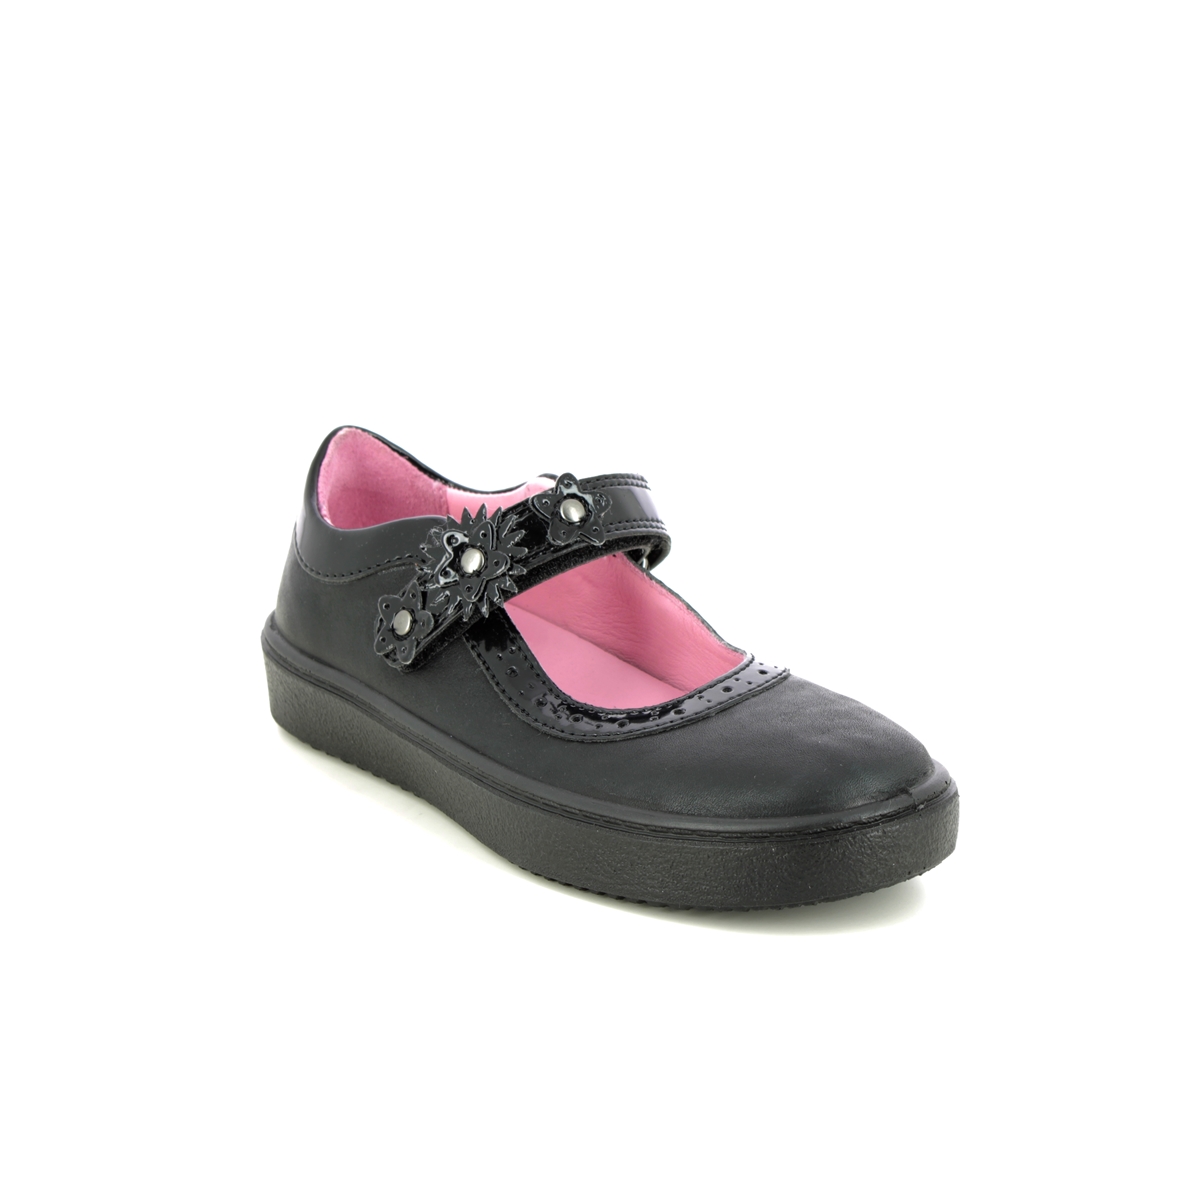 Superfit Heaven Mary Jane Black Leather Kids Girls Shoes 1006491-0000 In Size 29 In Plain Black Leather For School For kids